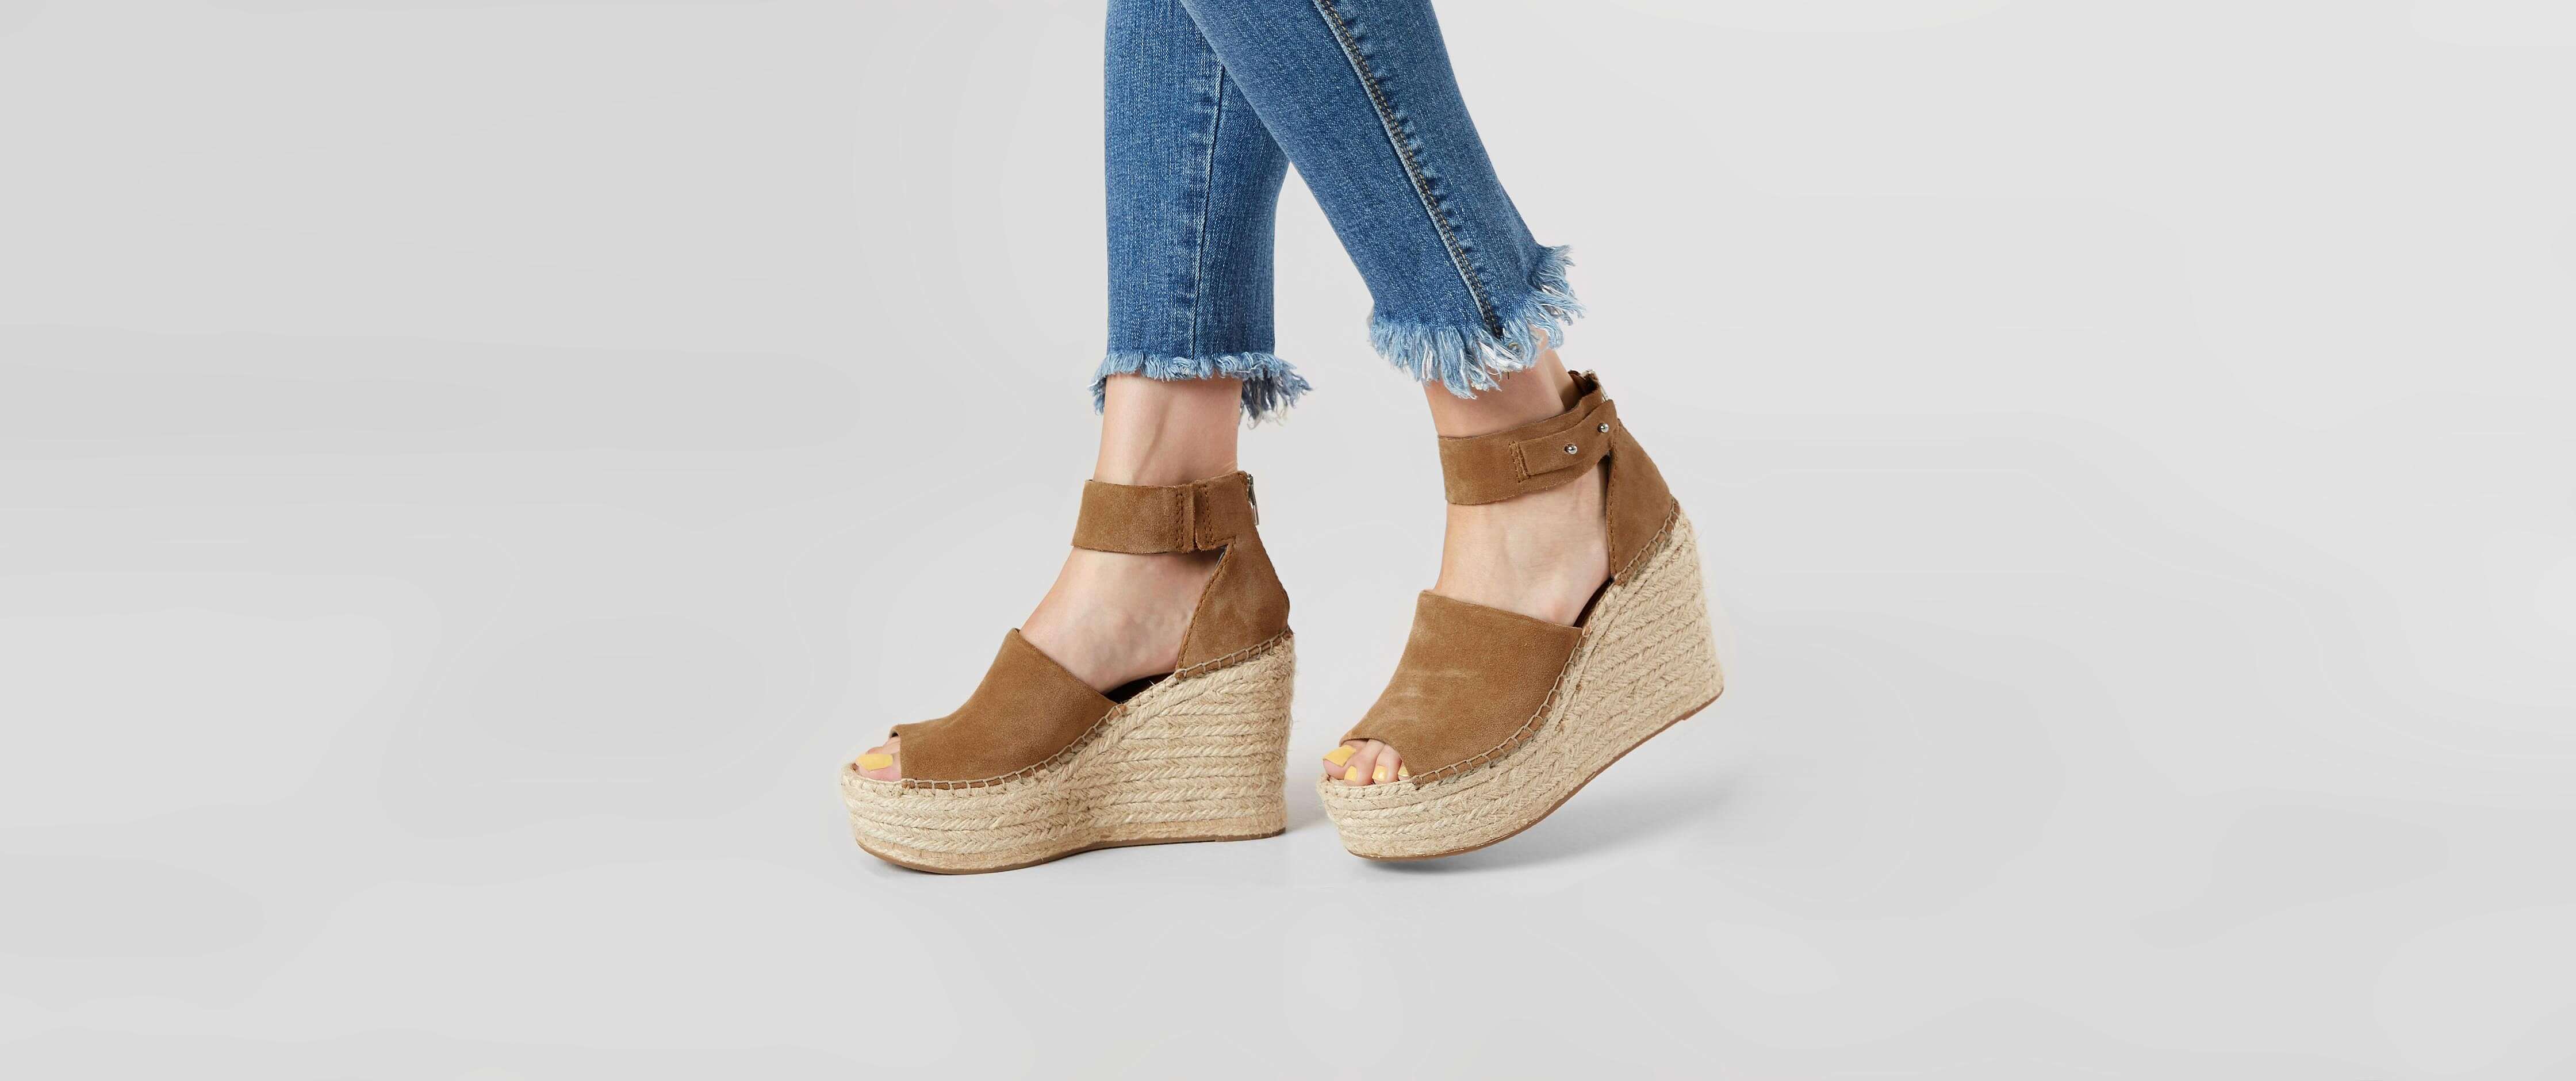 dolce vita wedge shoes